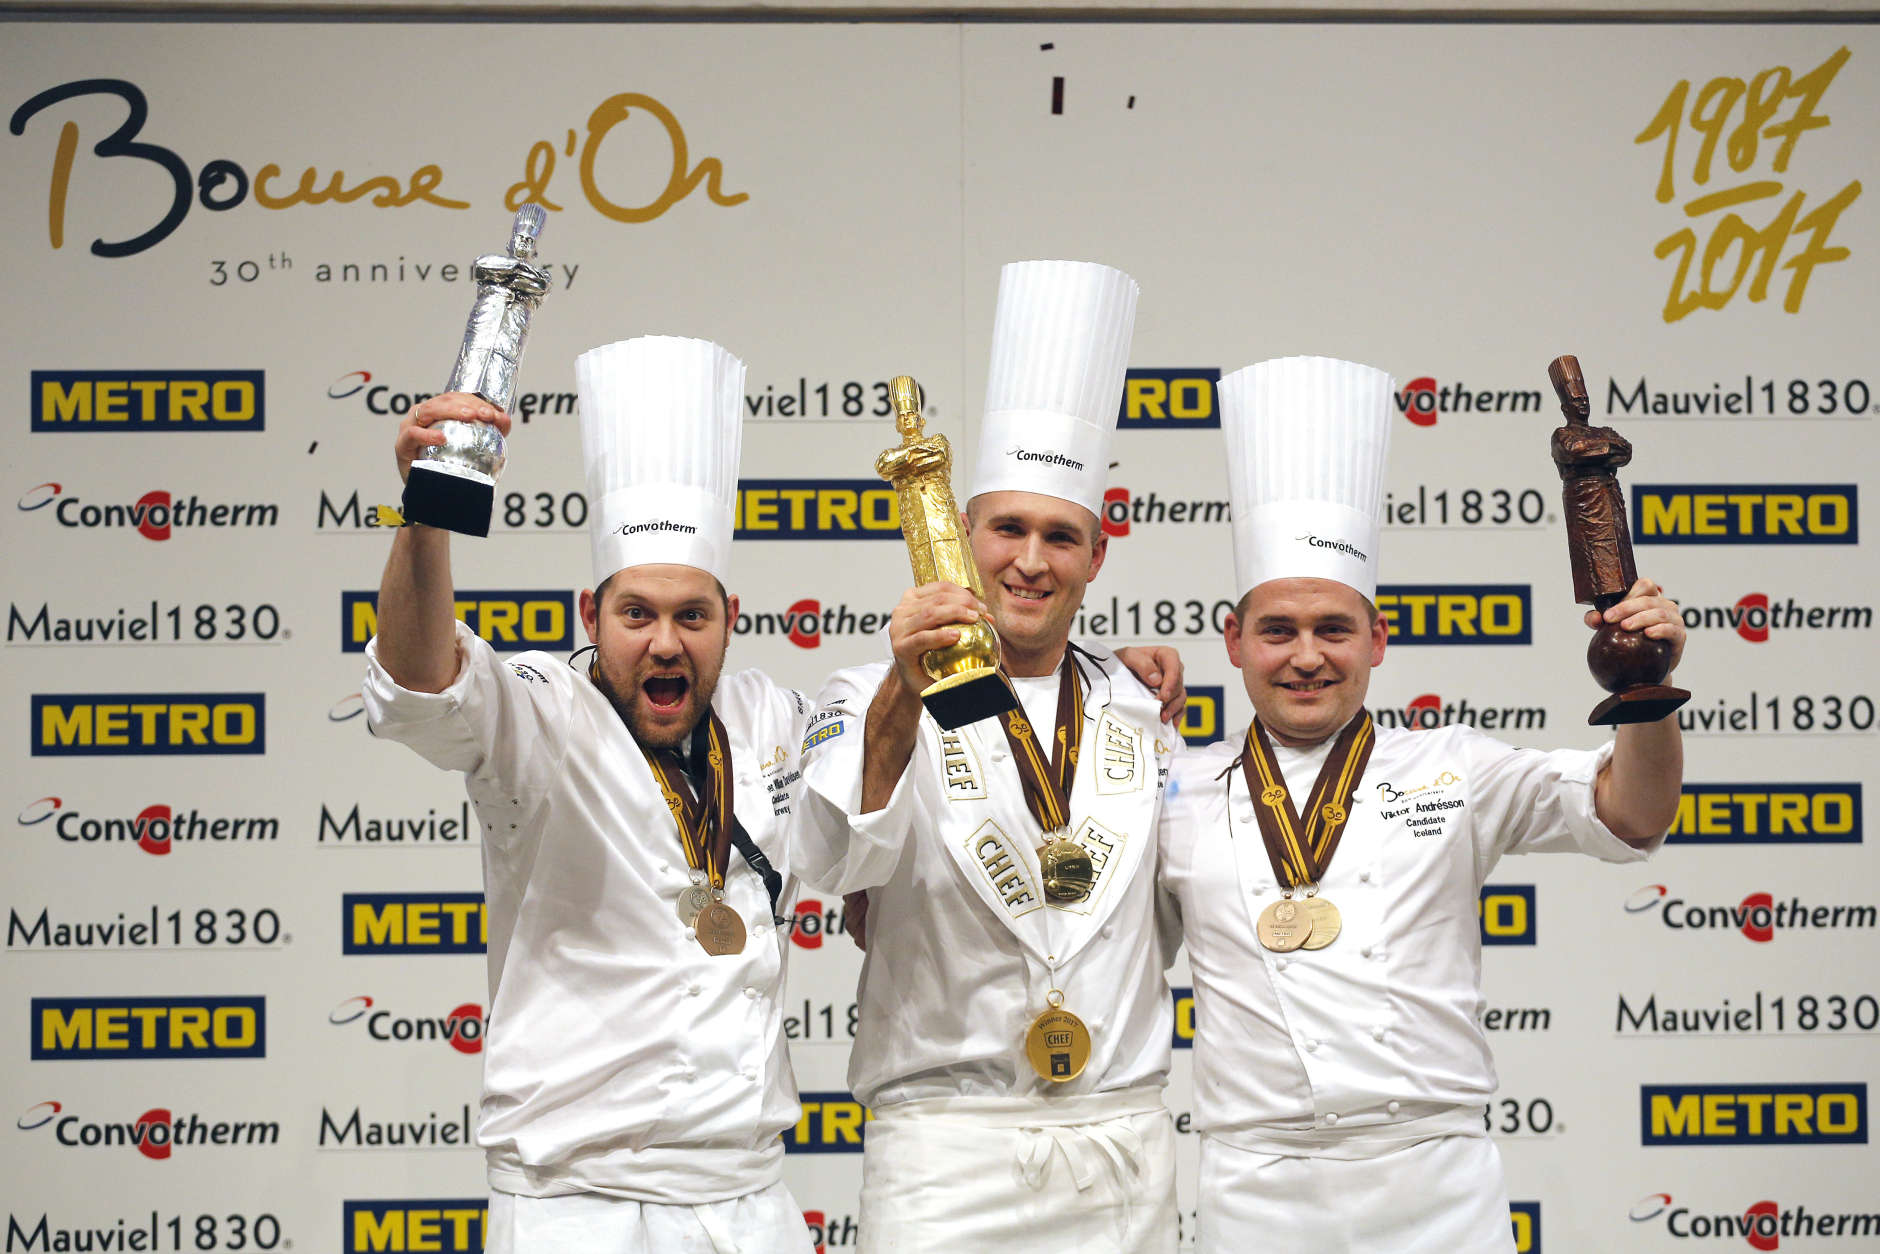 Mathew Peters of USA, center, celebrates on the podium after winning the "Bocuse d'Or" (Golden Bocuse) trophy, in Lyon, central France, ahead Christopher William Davidsen of Norway, left, who finished second, and Viktor Andresson of Iceland, right, who came third, Wednesday, Jan. 25, 2017.  The contest, a sort of world cup of the cuisine, was started in 1987 by Lyon chef Paul Bocuse to reward young international culinary talents. (AP Photo/Laurent Cipriani)